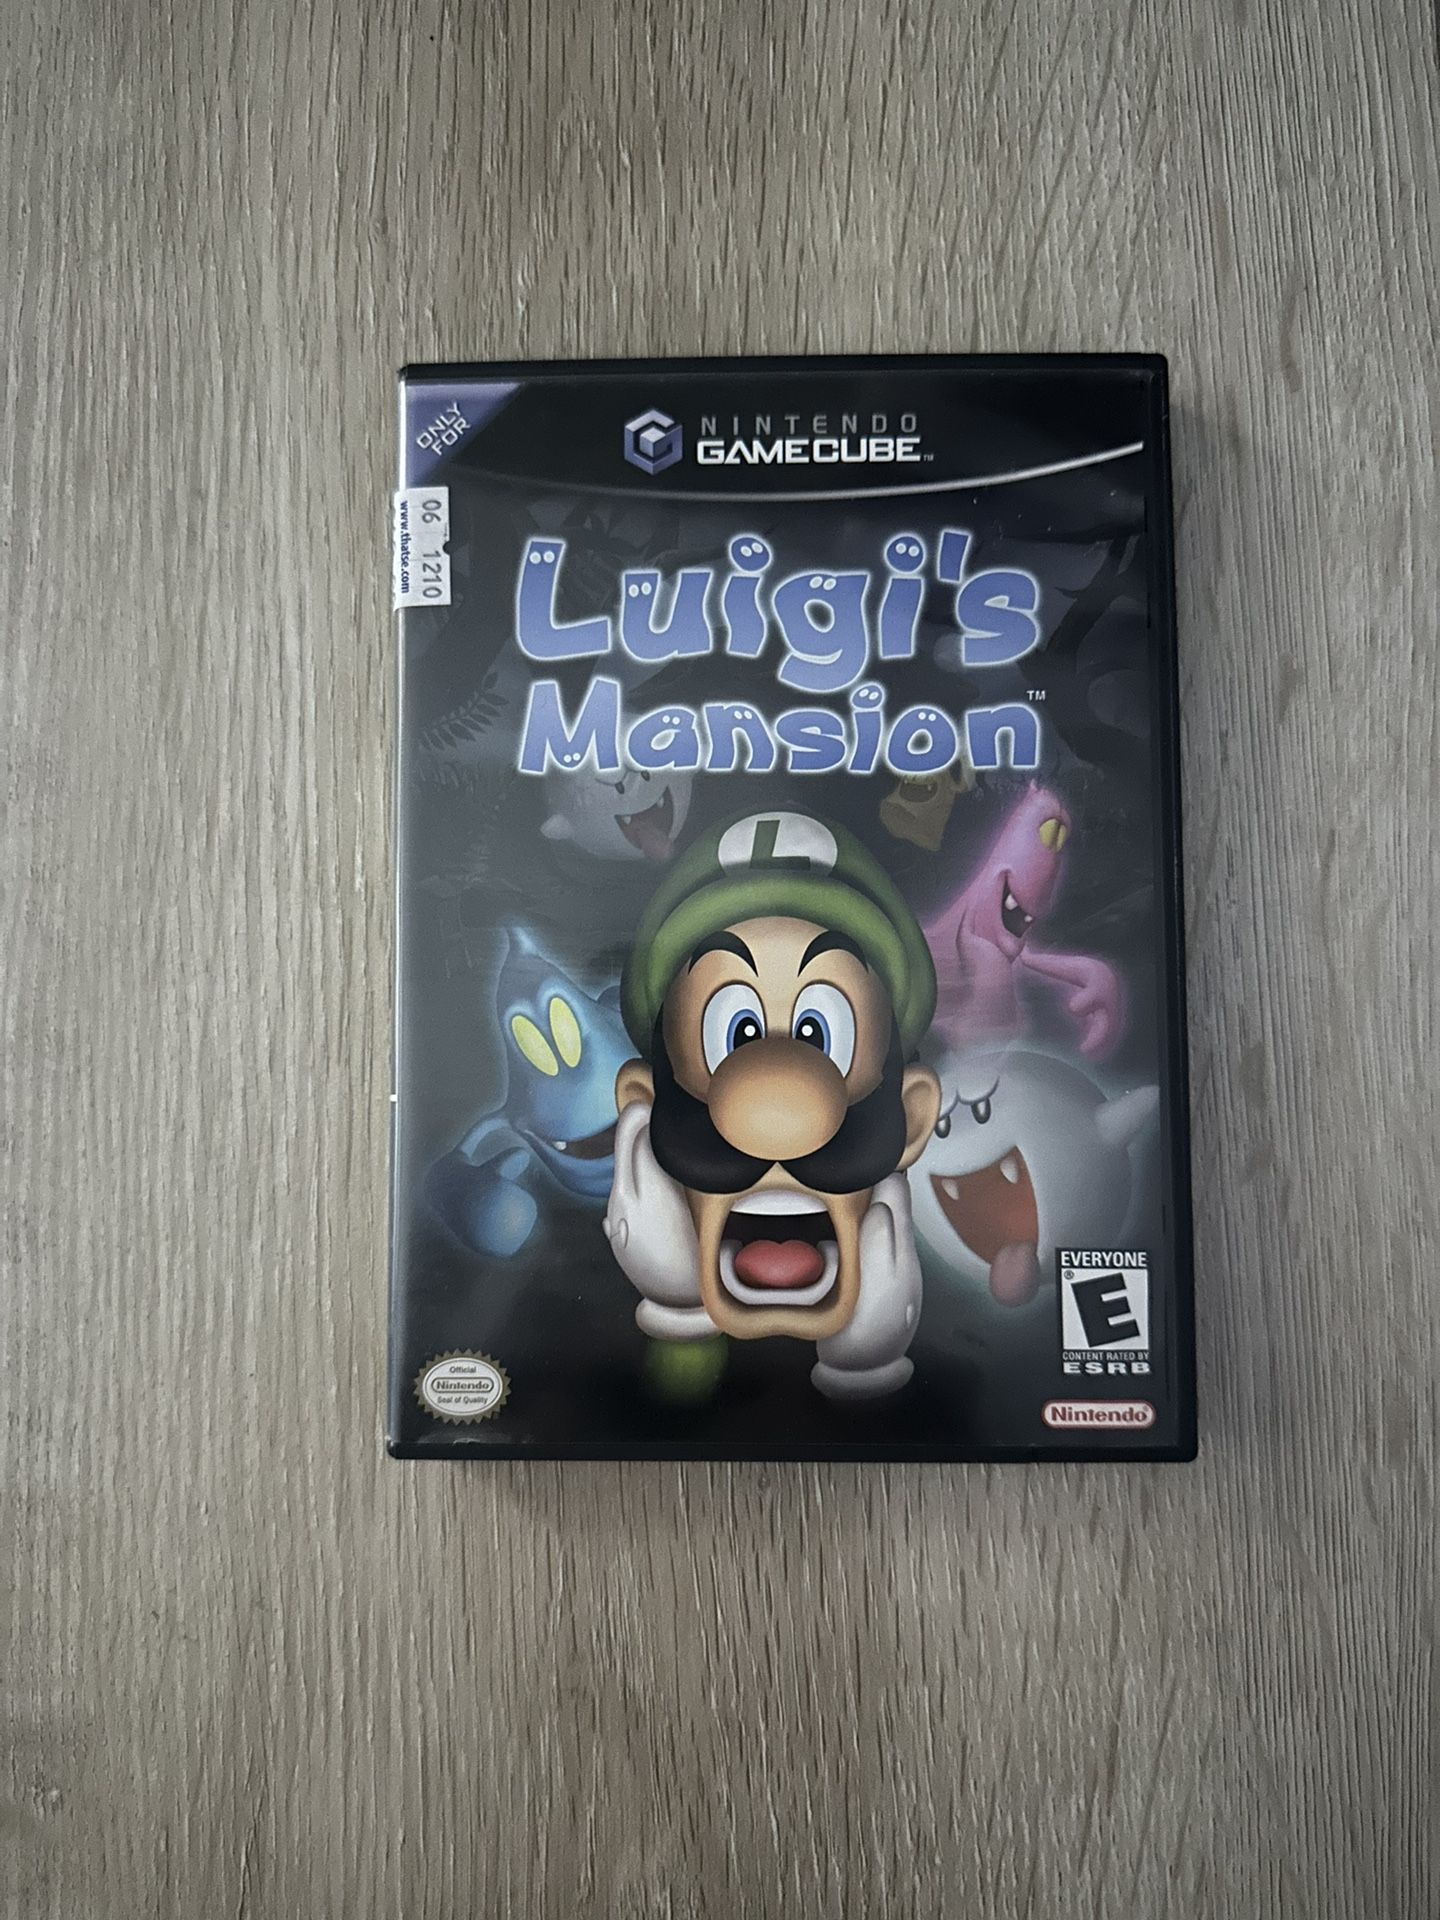 Luigi’s Mansion - NINTENDO GAMECUBE- COMPLETE IN BOX - TESTED WORKING 